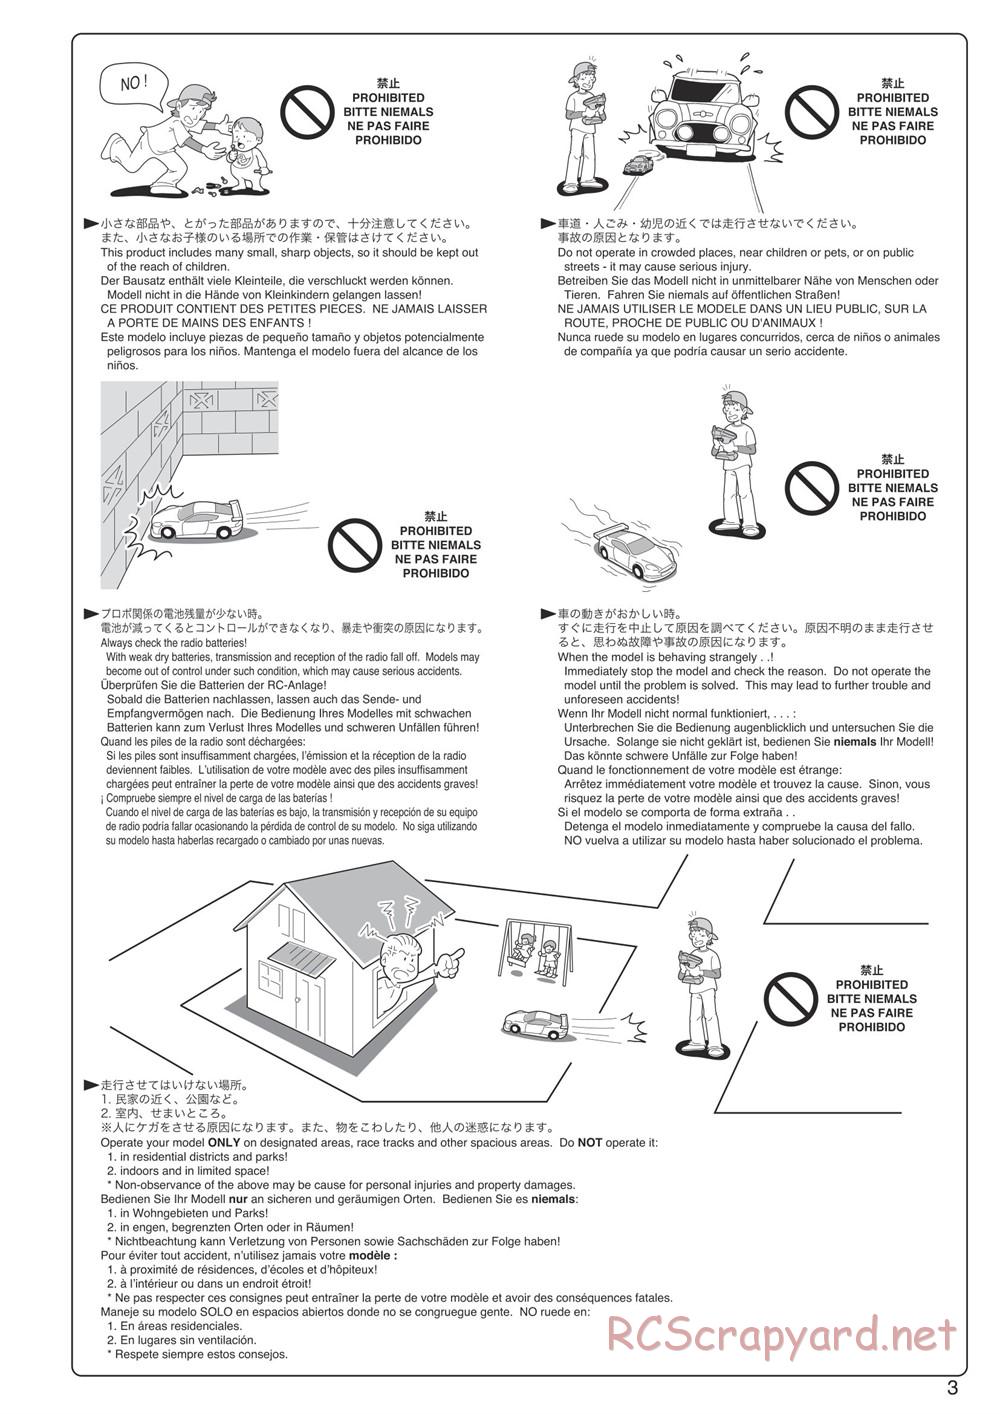 Kyosho - DMT - Manual - Page 3